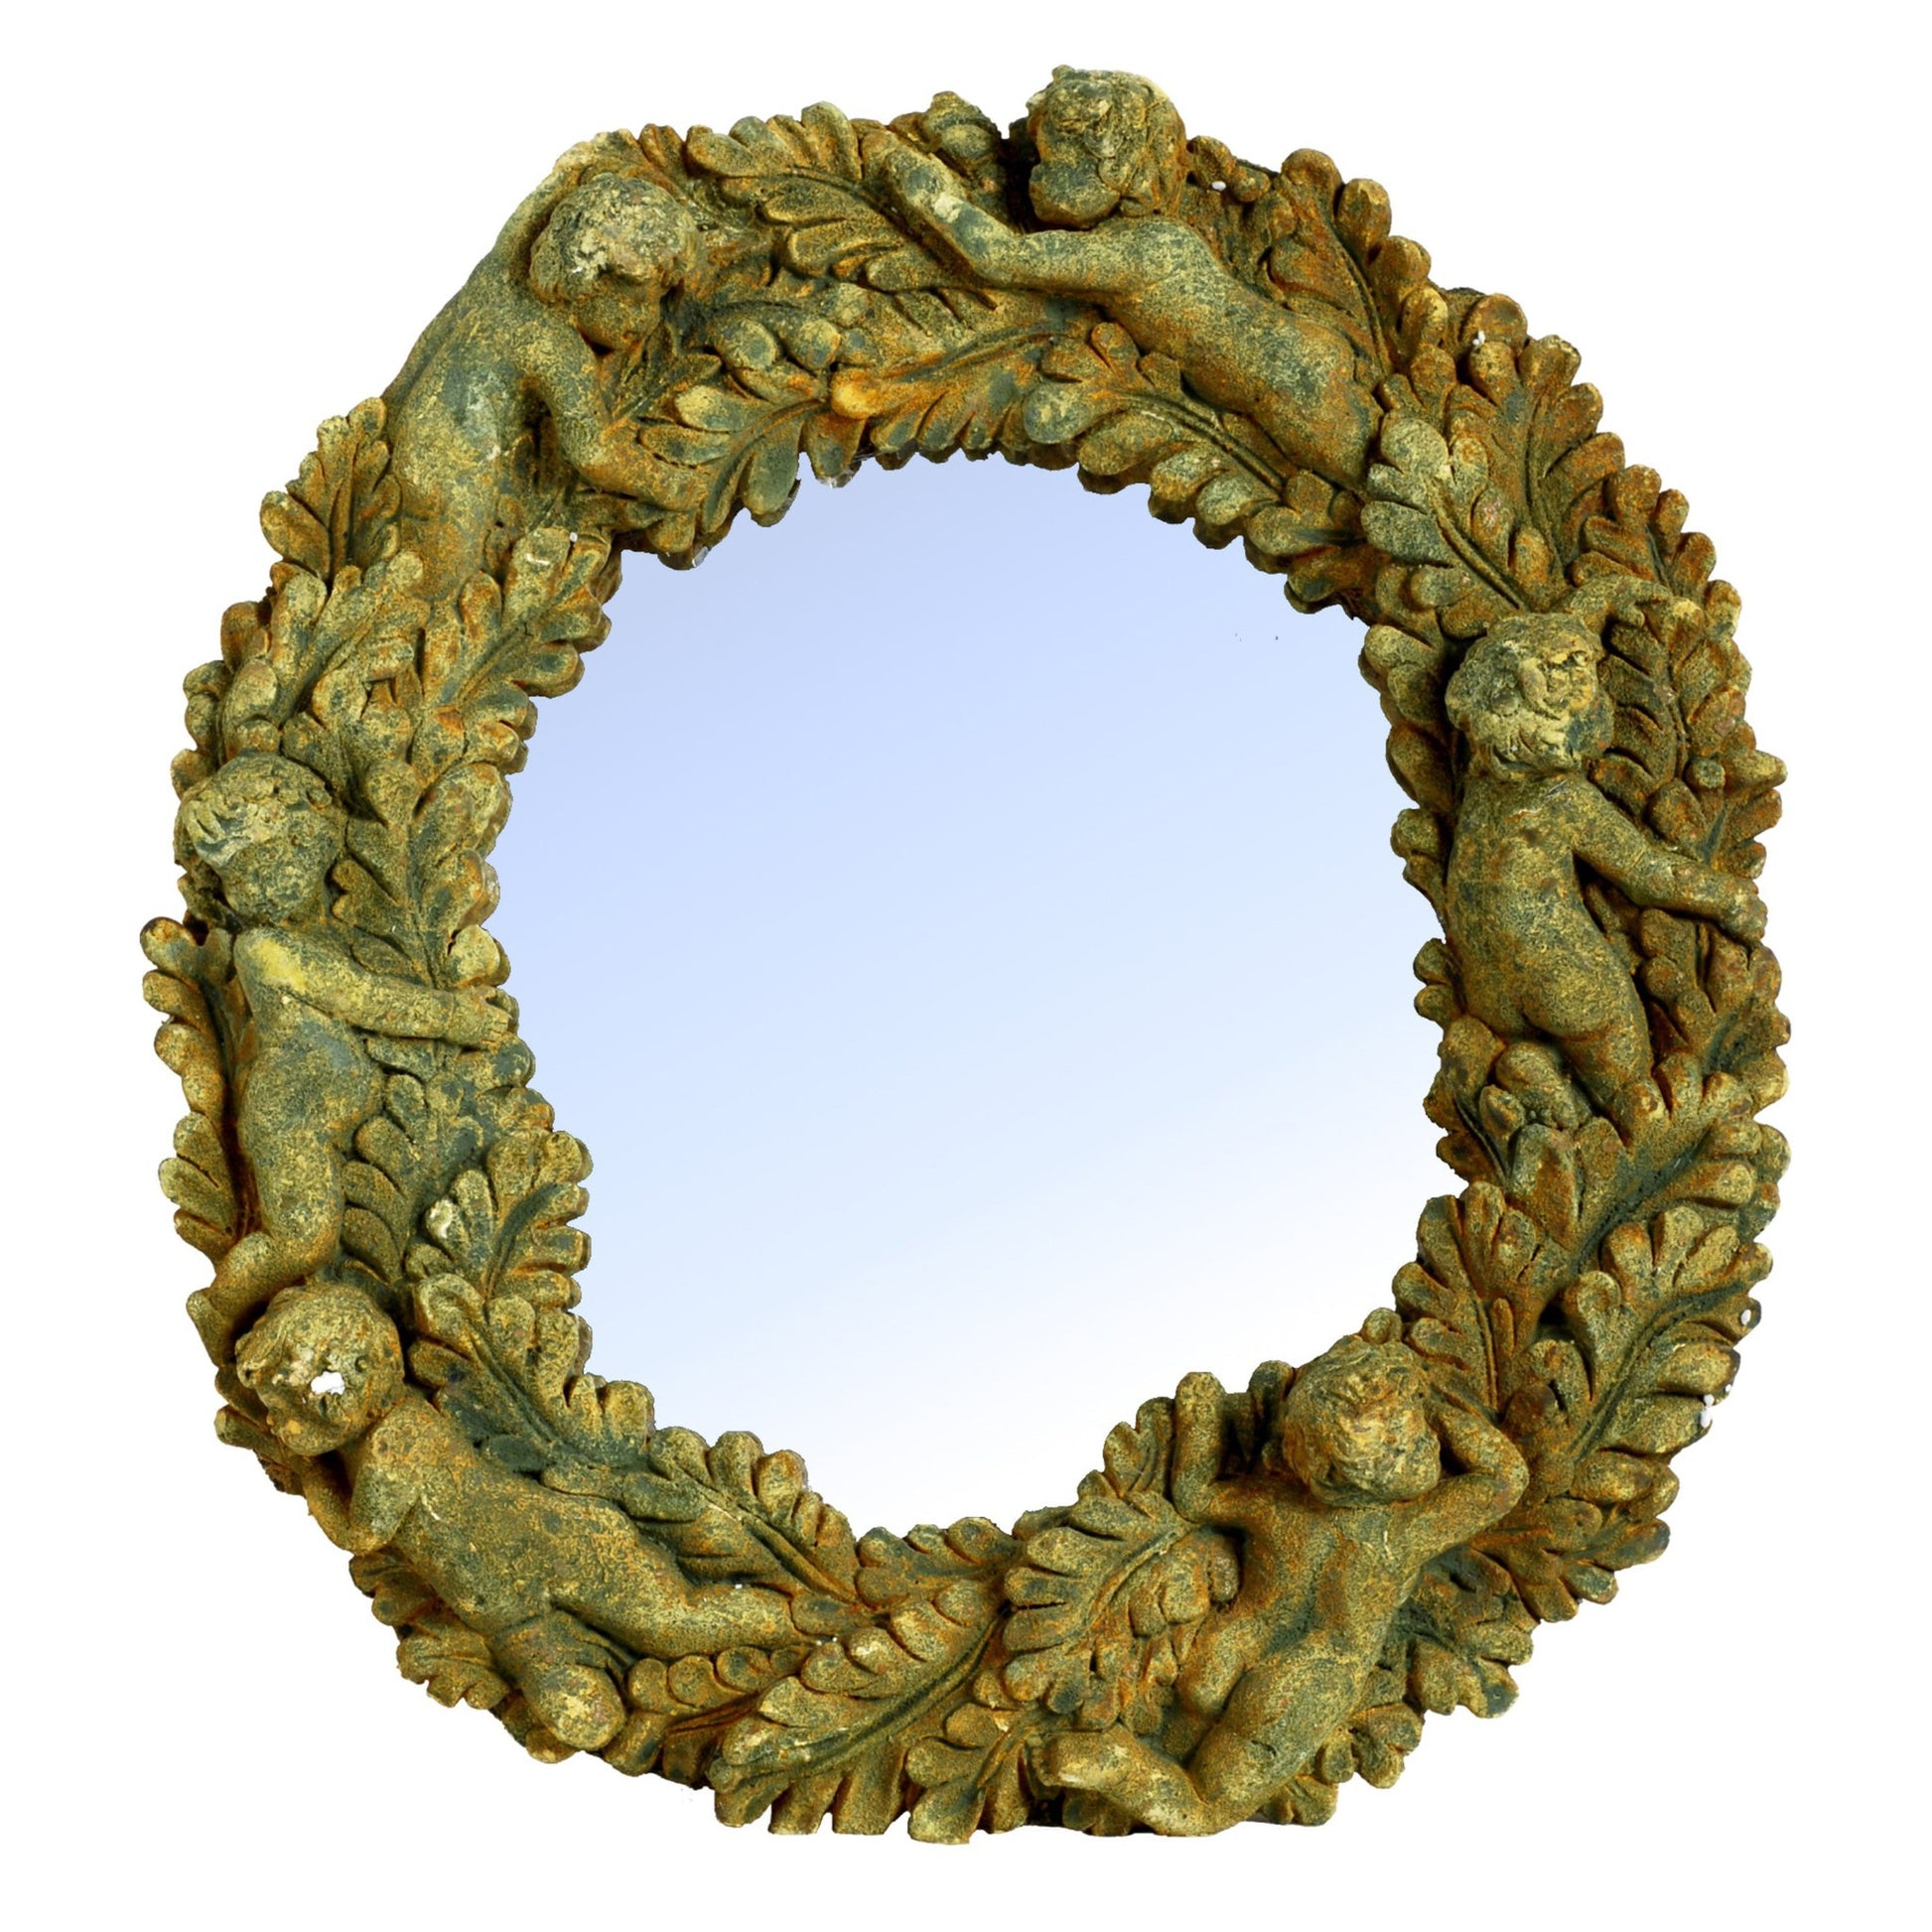 Benzara 19" Rustic Green Round Wall Decorative Mirror With Thick Cemented Border